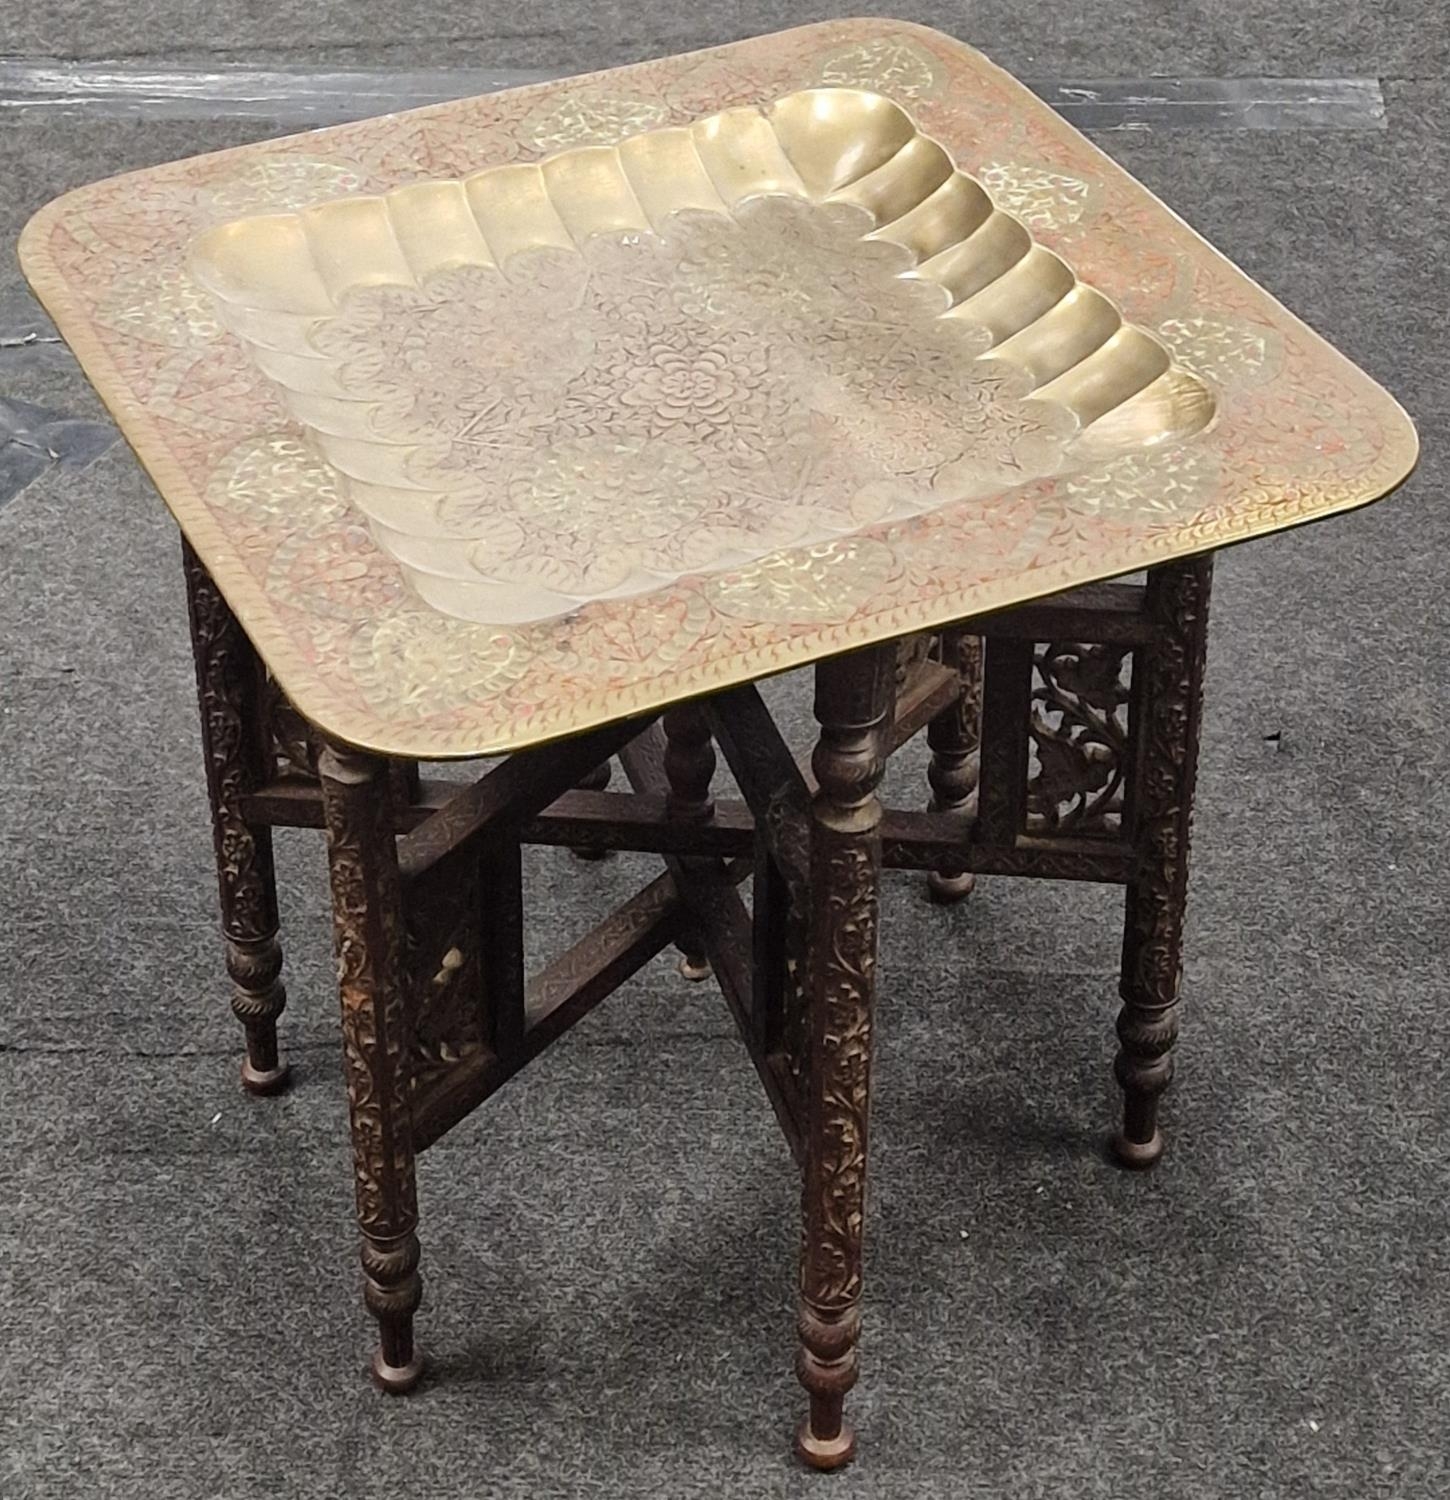 Vintage oriental carved folding table with removable brass top 46x48x49cm.